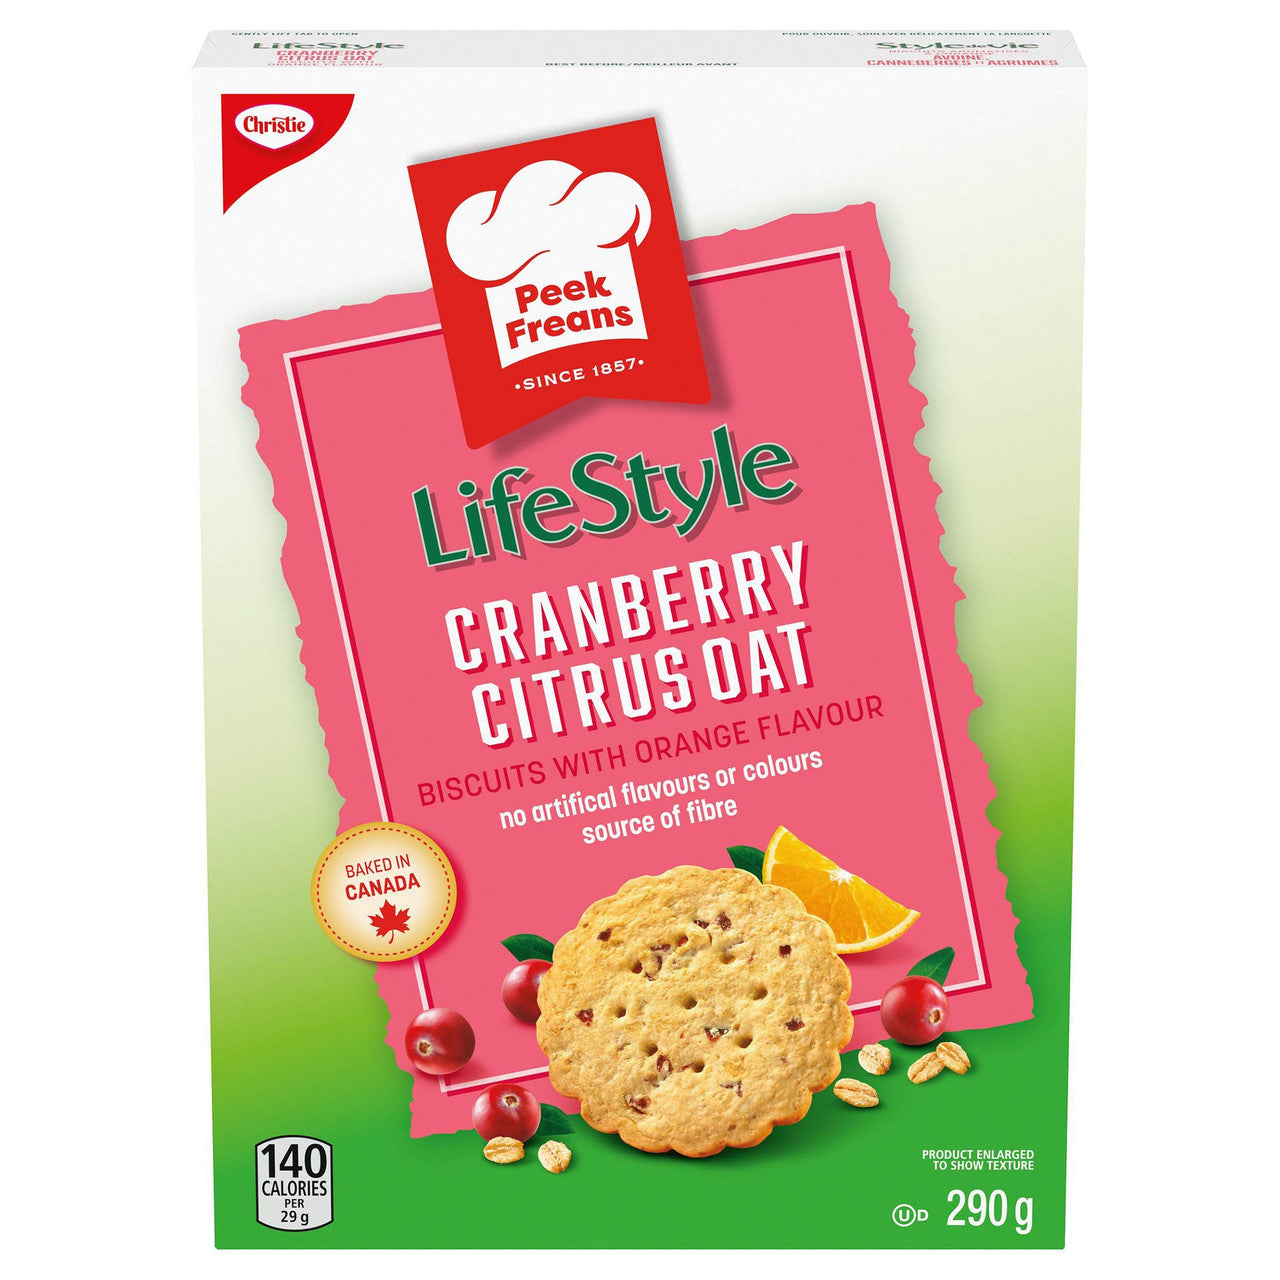 Peek Freans Lifestyle Cranberry Citrus Oat Crunch Cookies, 290g/10oz. box (Imported from Canada)